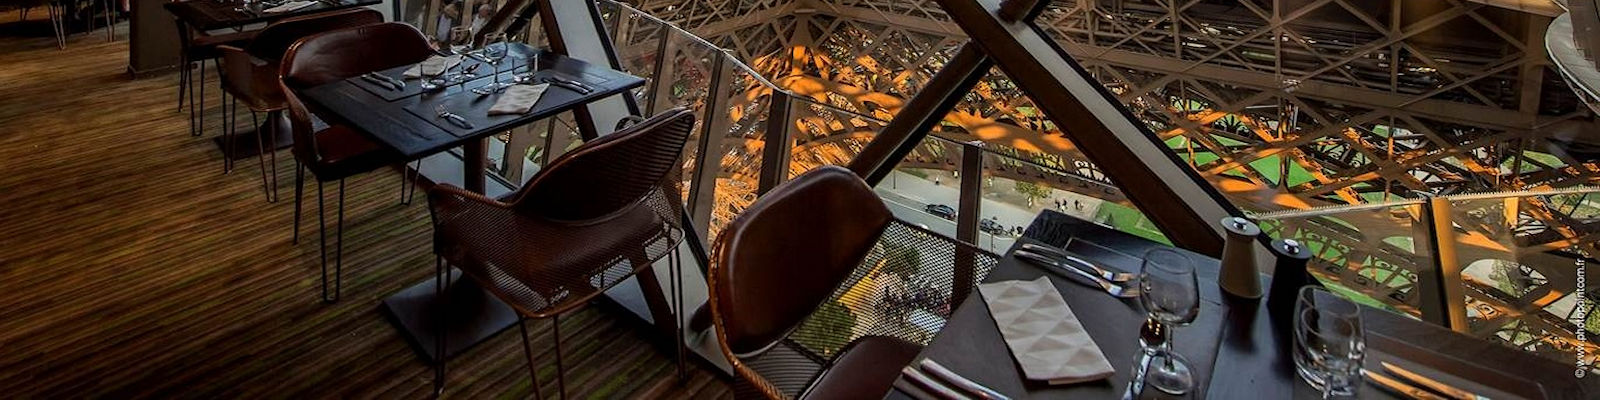 Eiffel Tower Restaurant Info and Reservations